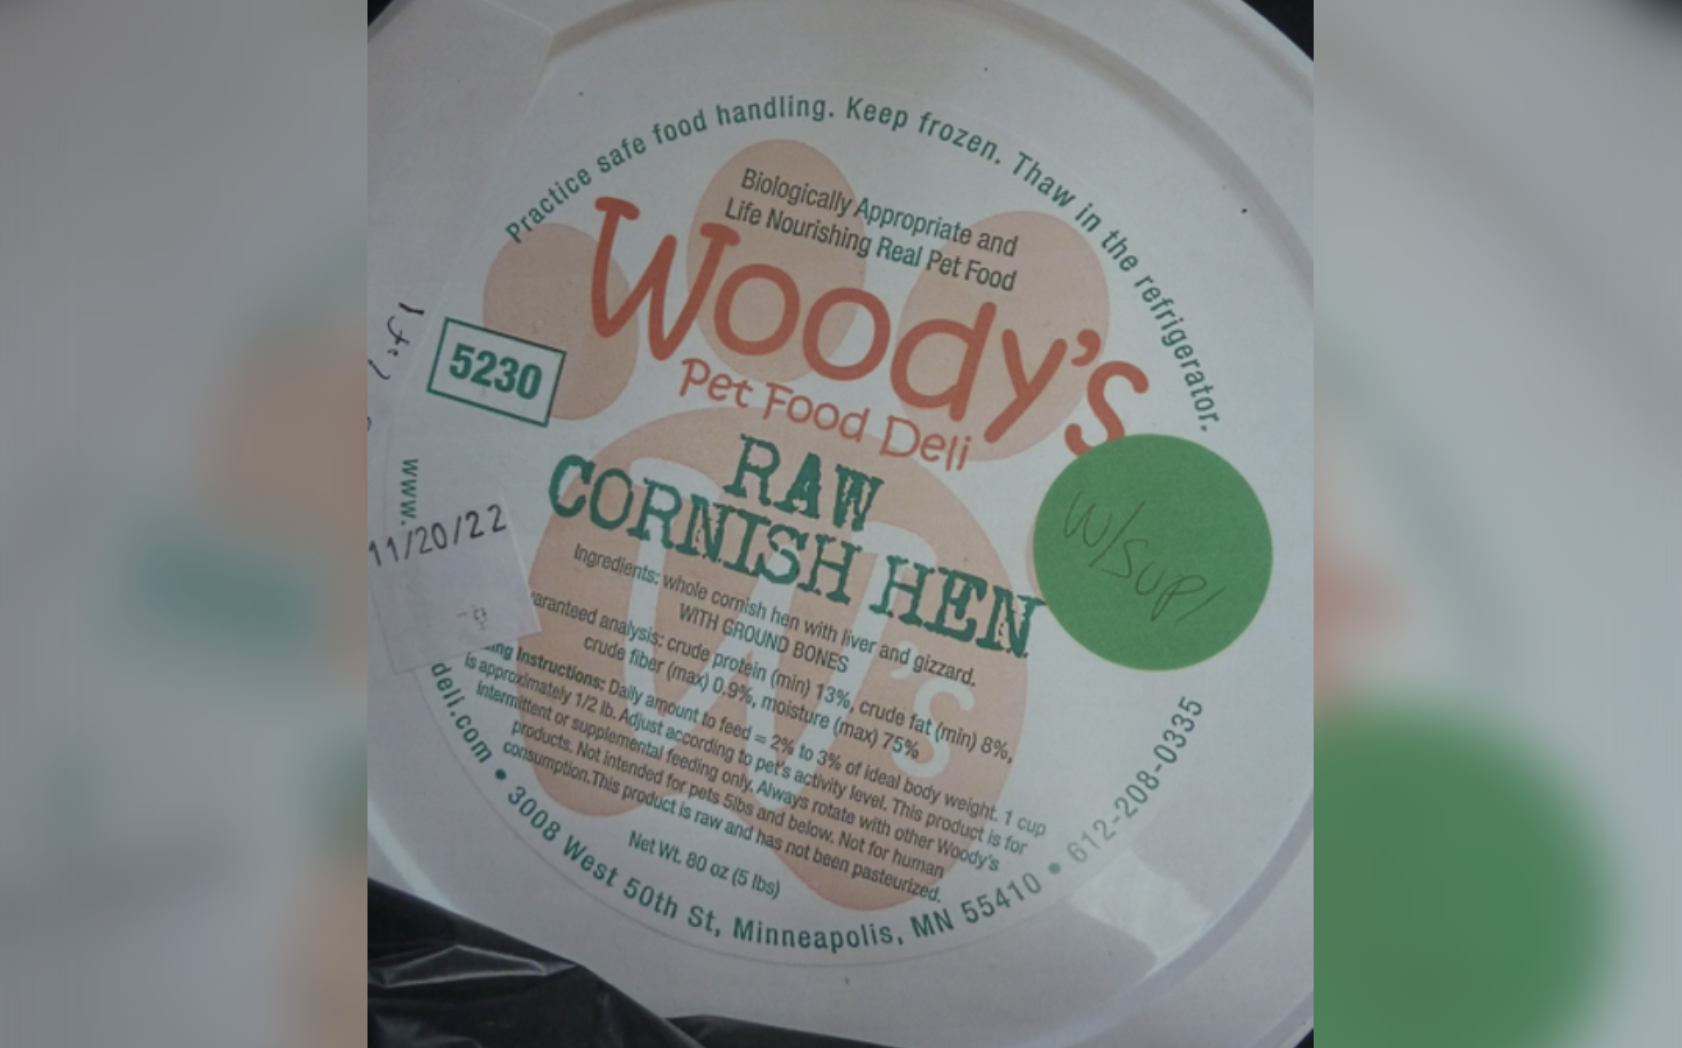 Photo showing the top of the container for Woody's Pet Food Deli Raw Cornish Hen With Supplements -- There is a green sticker with "w/ Suppl" written on it and a white sticker with the expiration date 11/20/22.